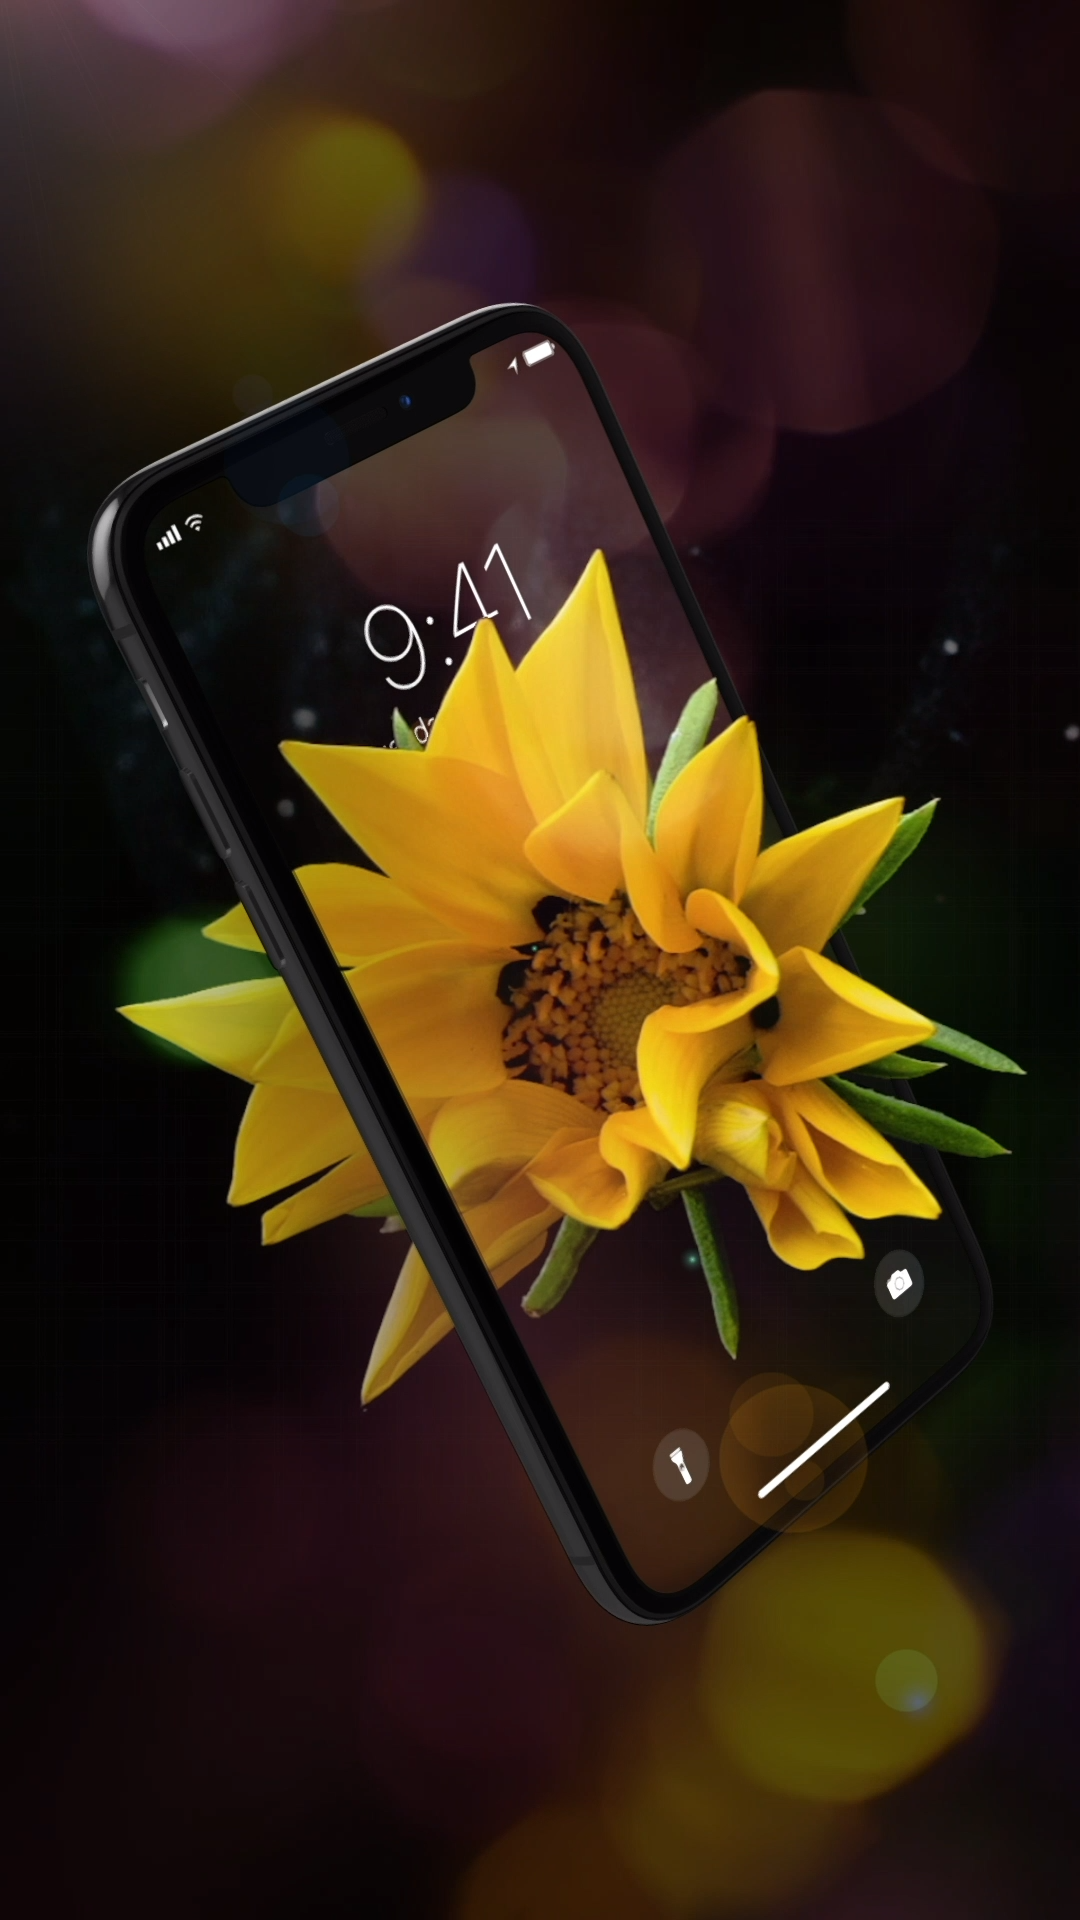 Incredible Live Wallpaper For Your iPhone Refresh Device